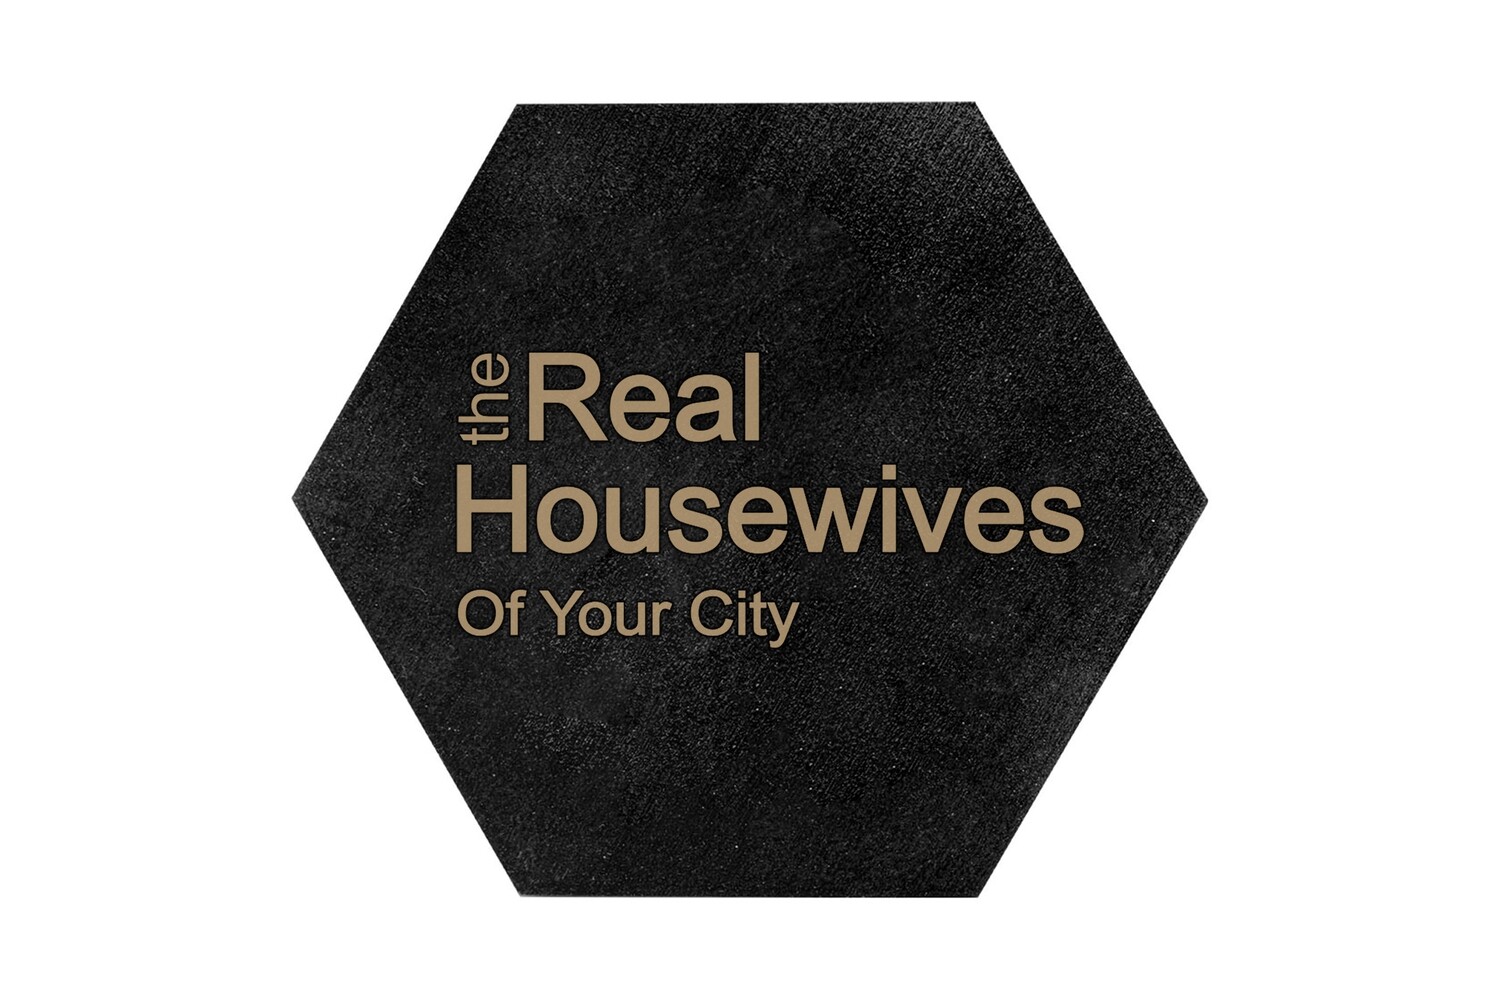 The Real Housewives of (Add Your Custom Location) HEX Hand-Painted Wood Coaster Set